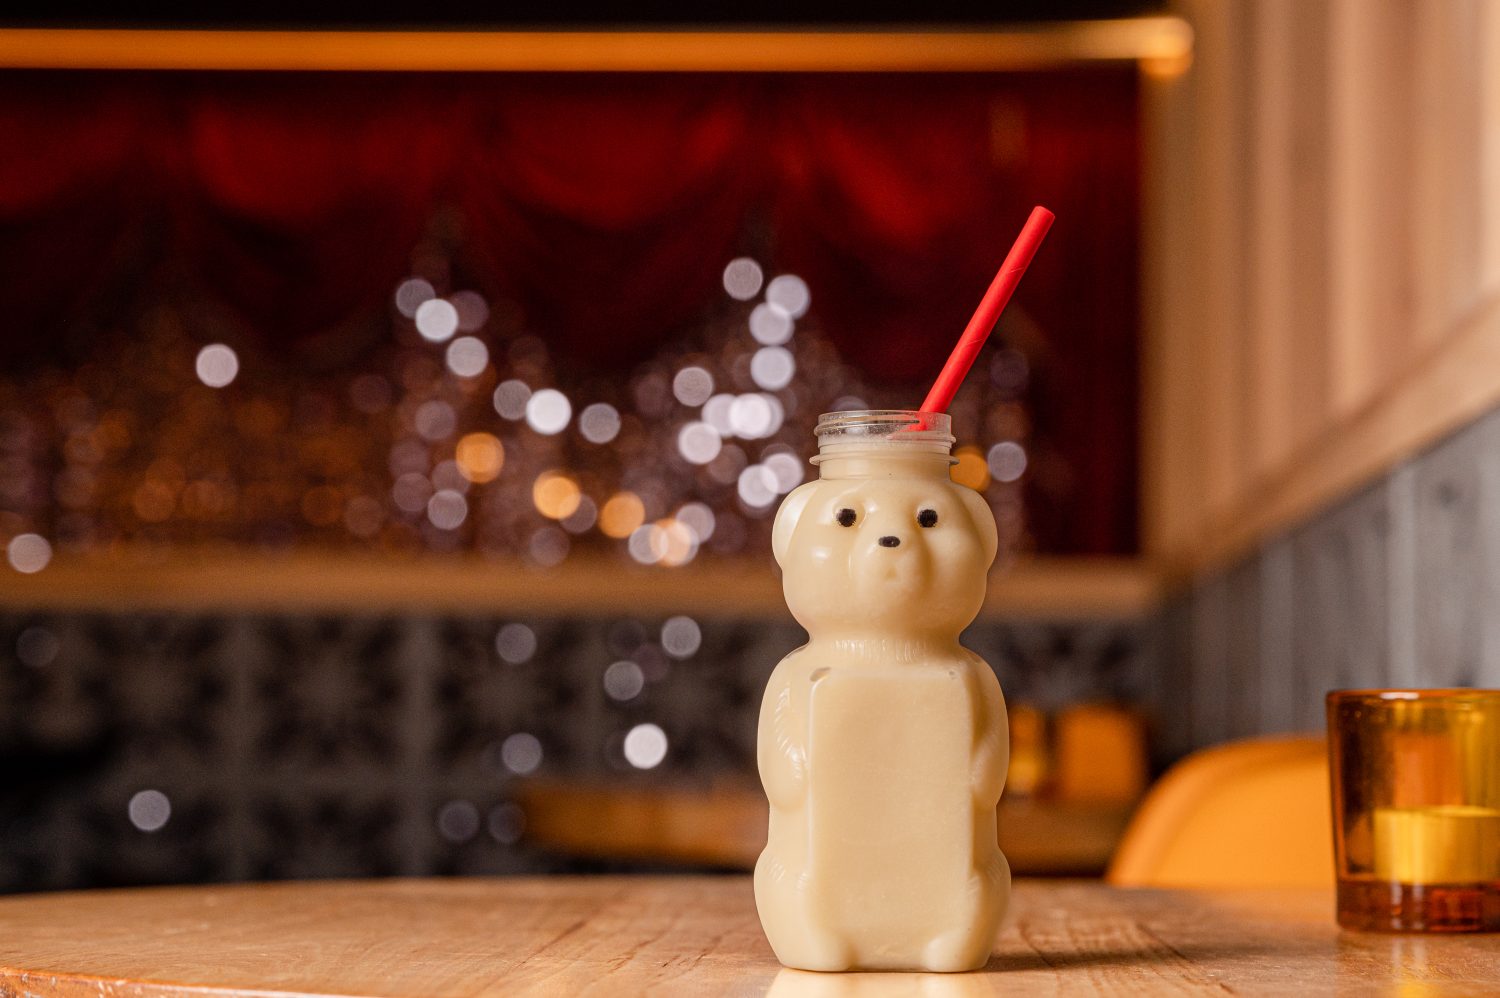 a cup shaped like a bear cub filled with a cocktail.